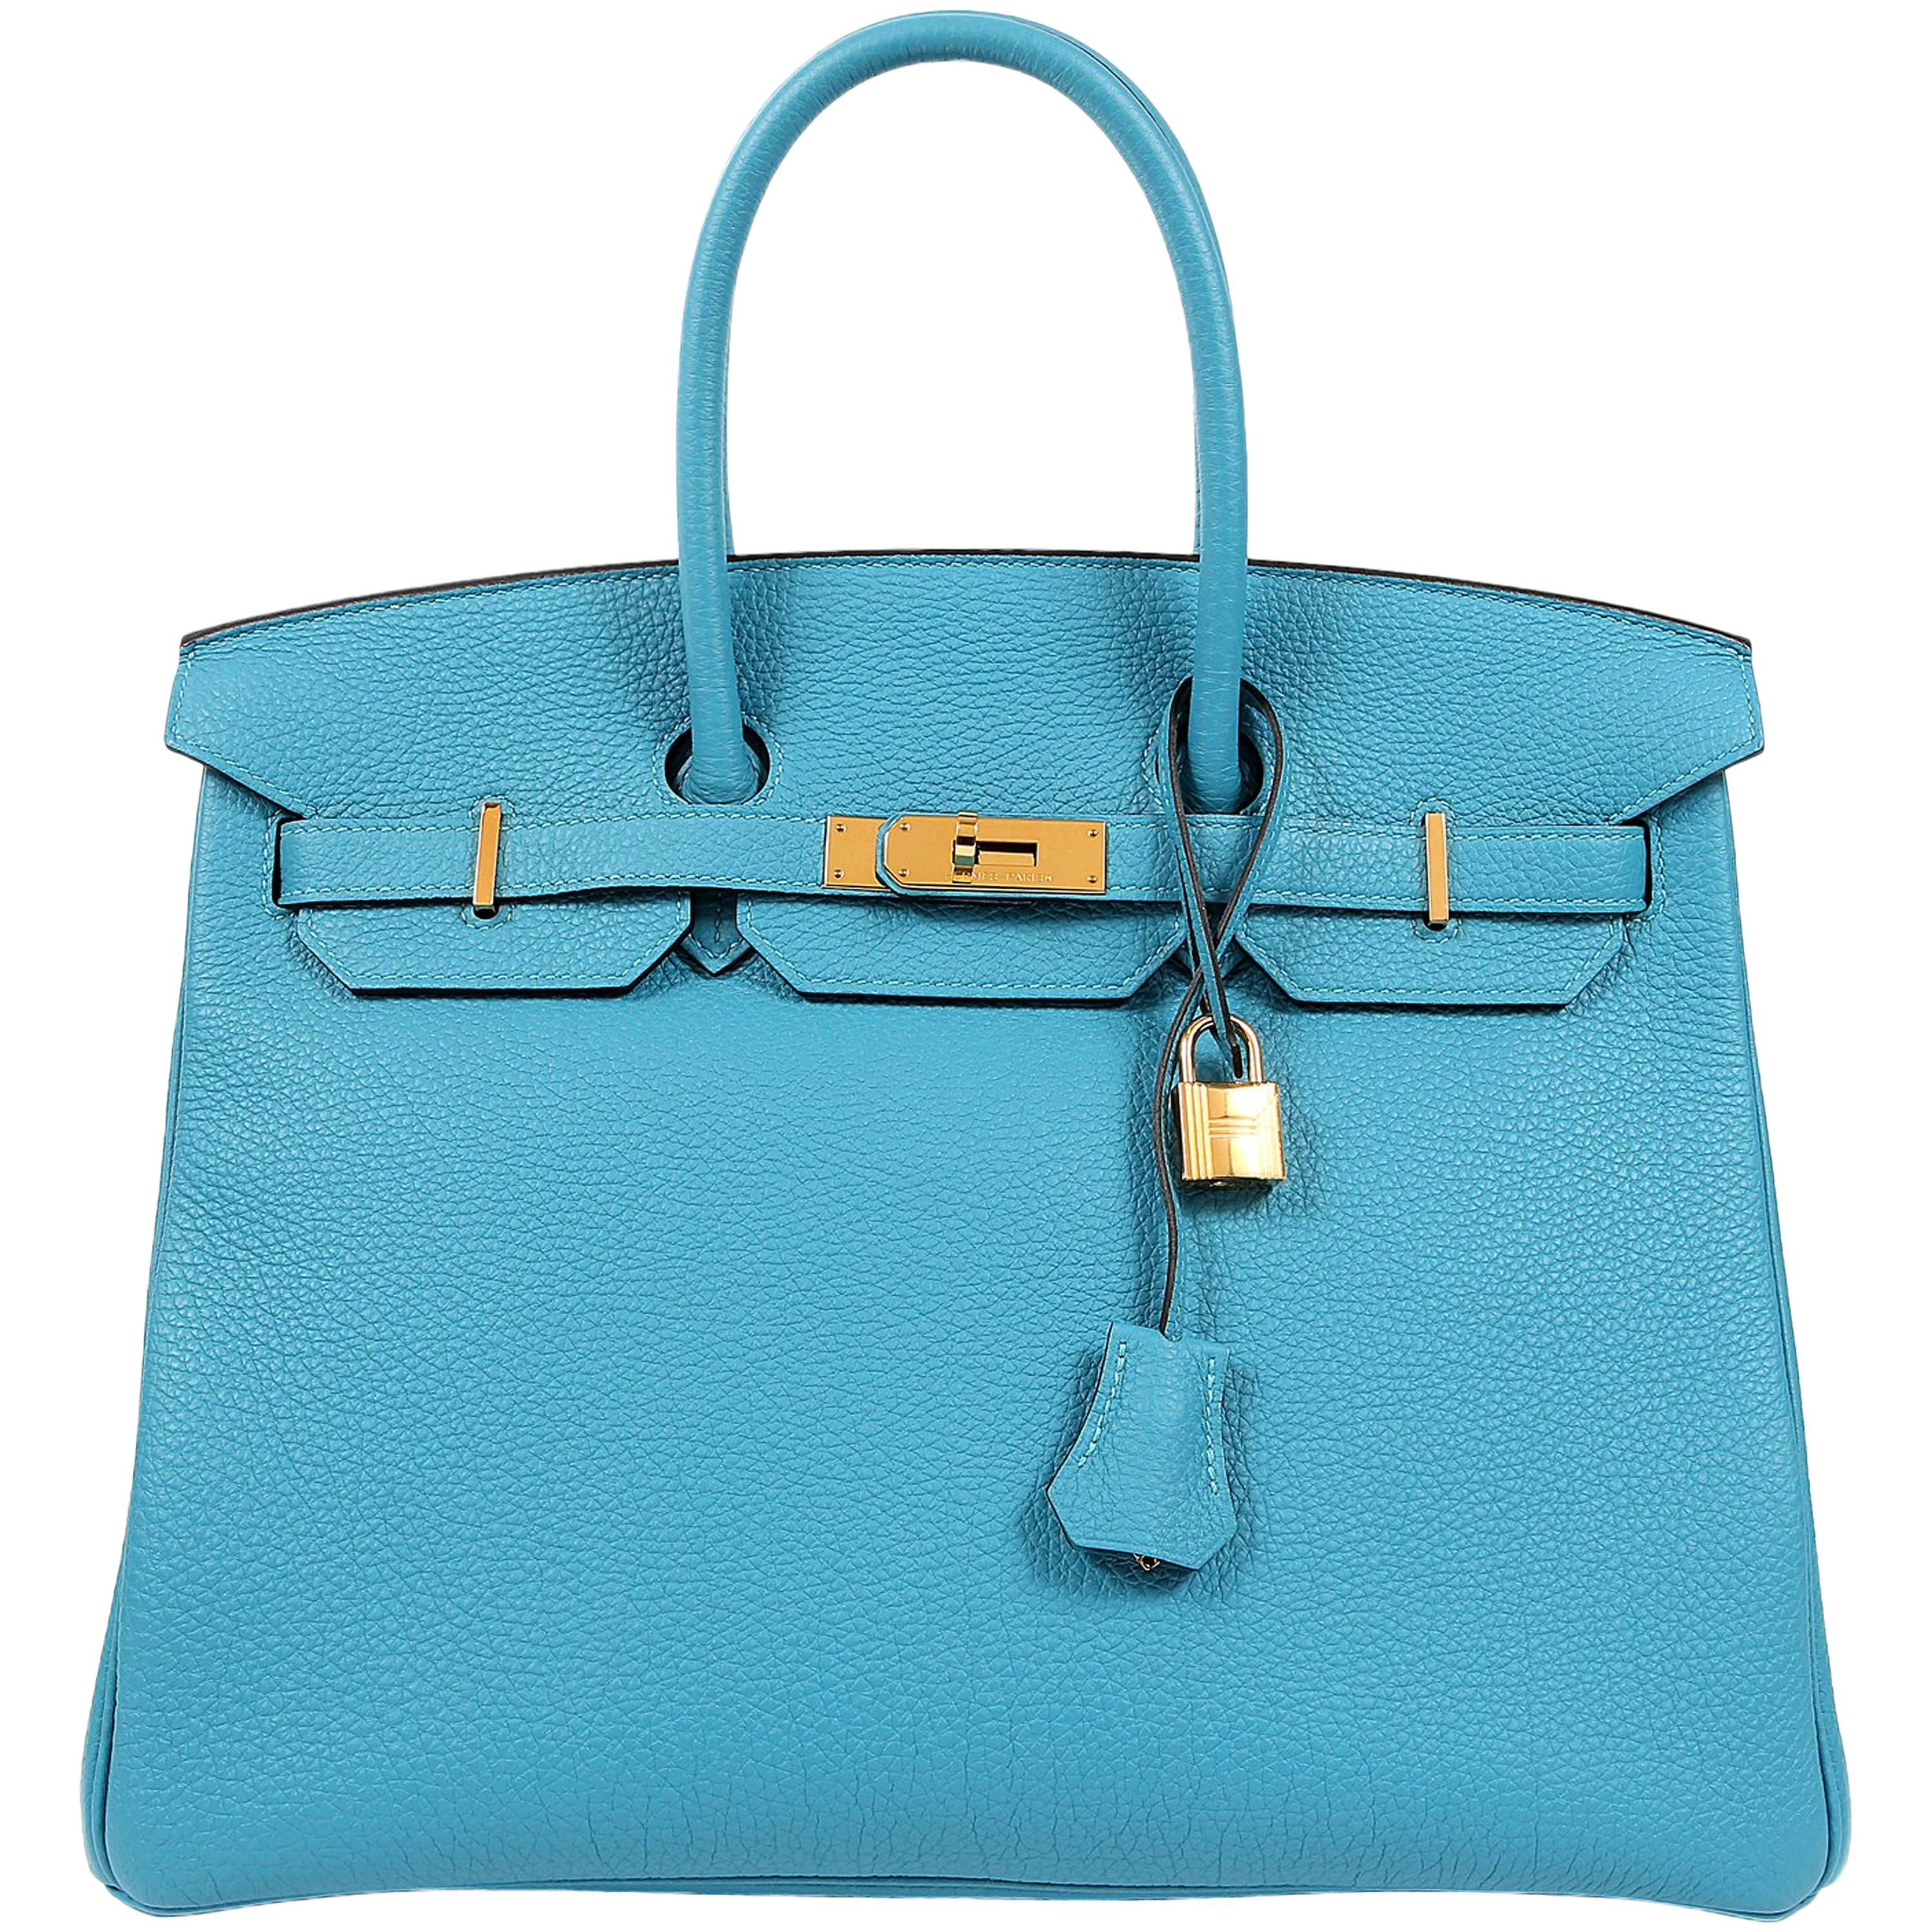 Hermes Turquoise Togo 35 cm Birkin Bag with GHW For Sale